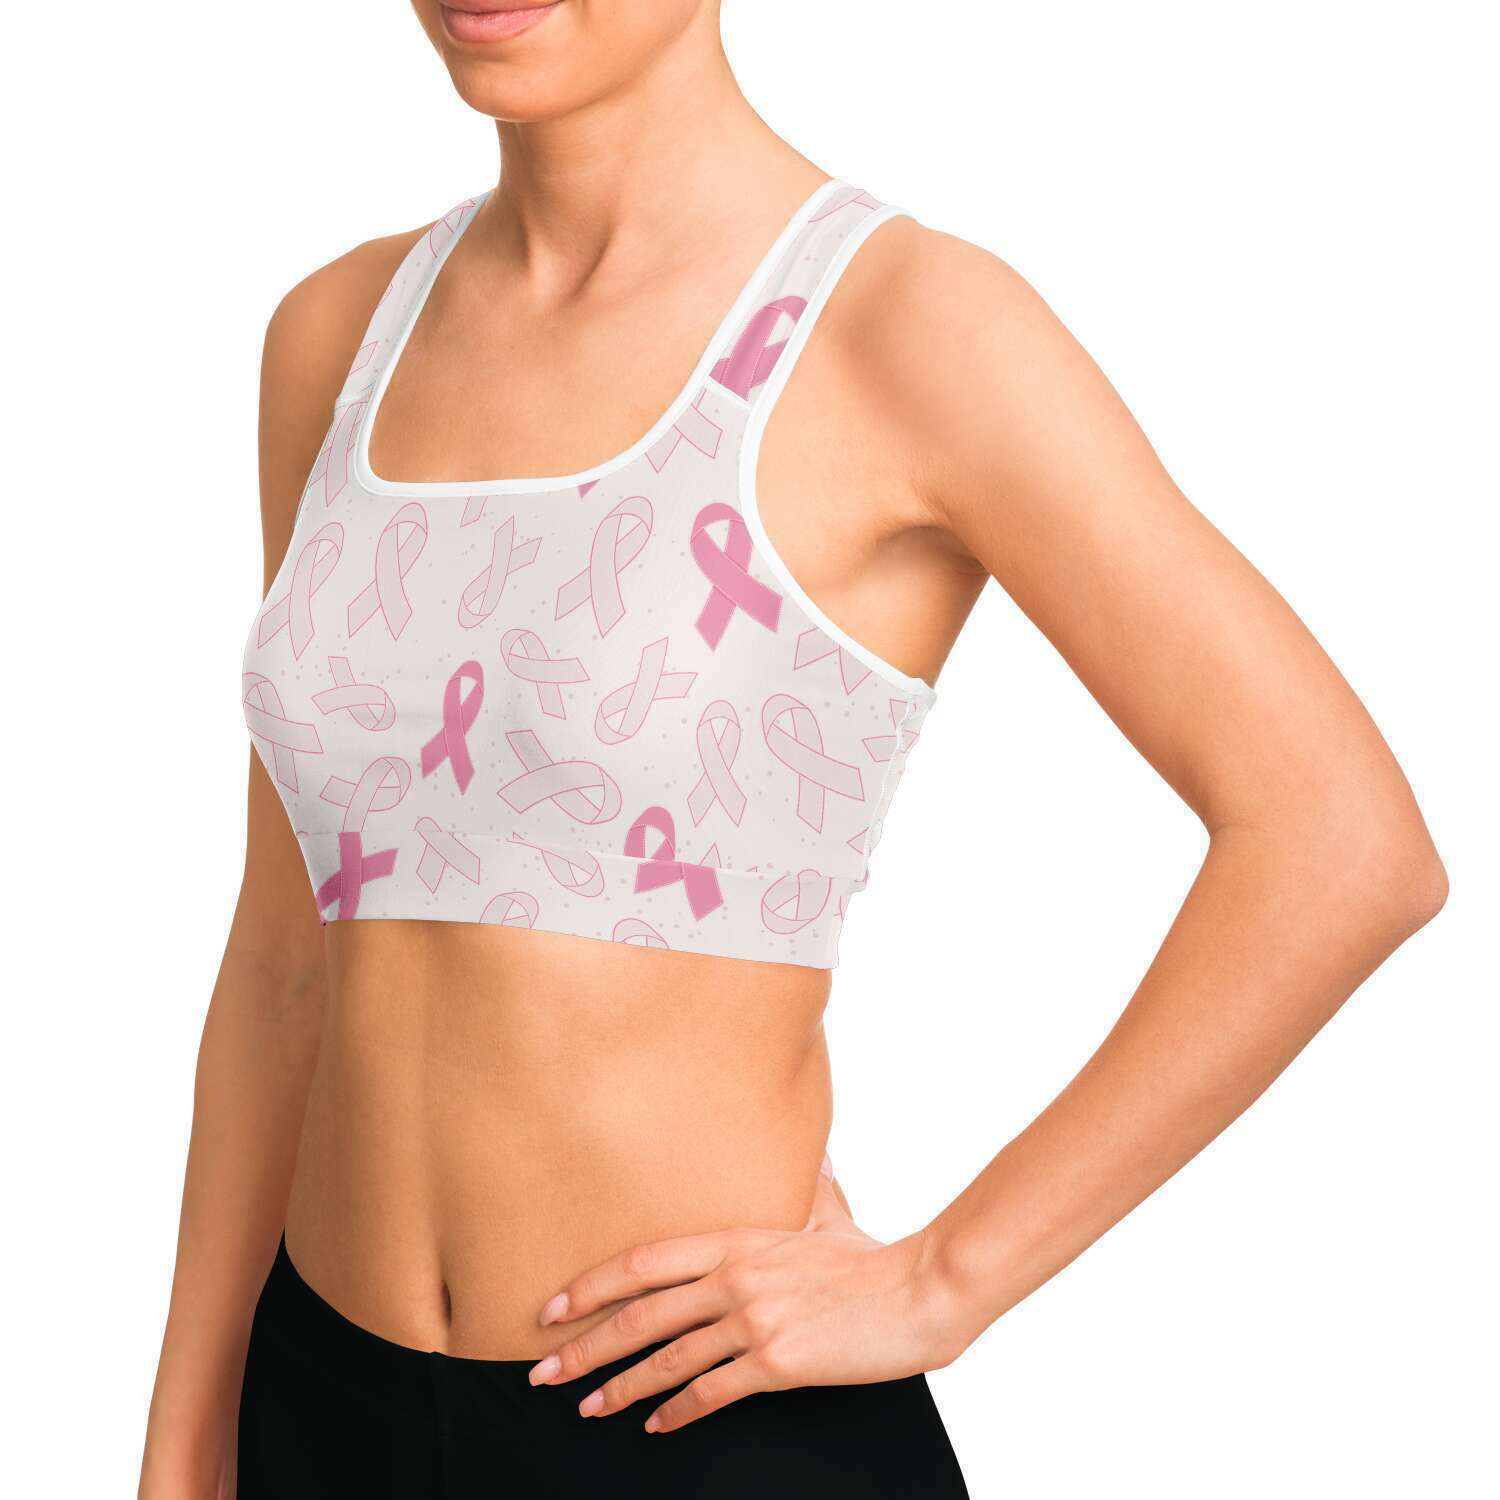  Pink Ribbon Breast Cancer Awareness Sports Bras for